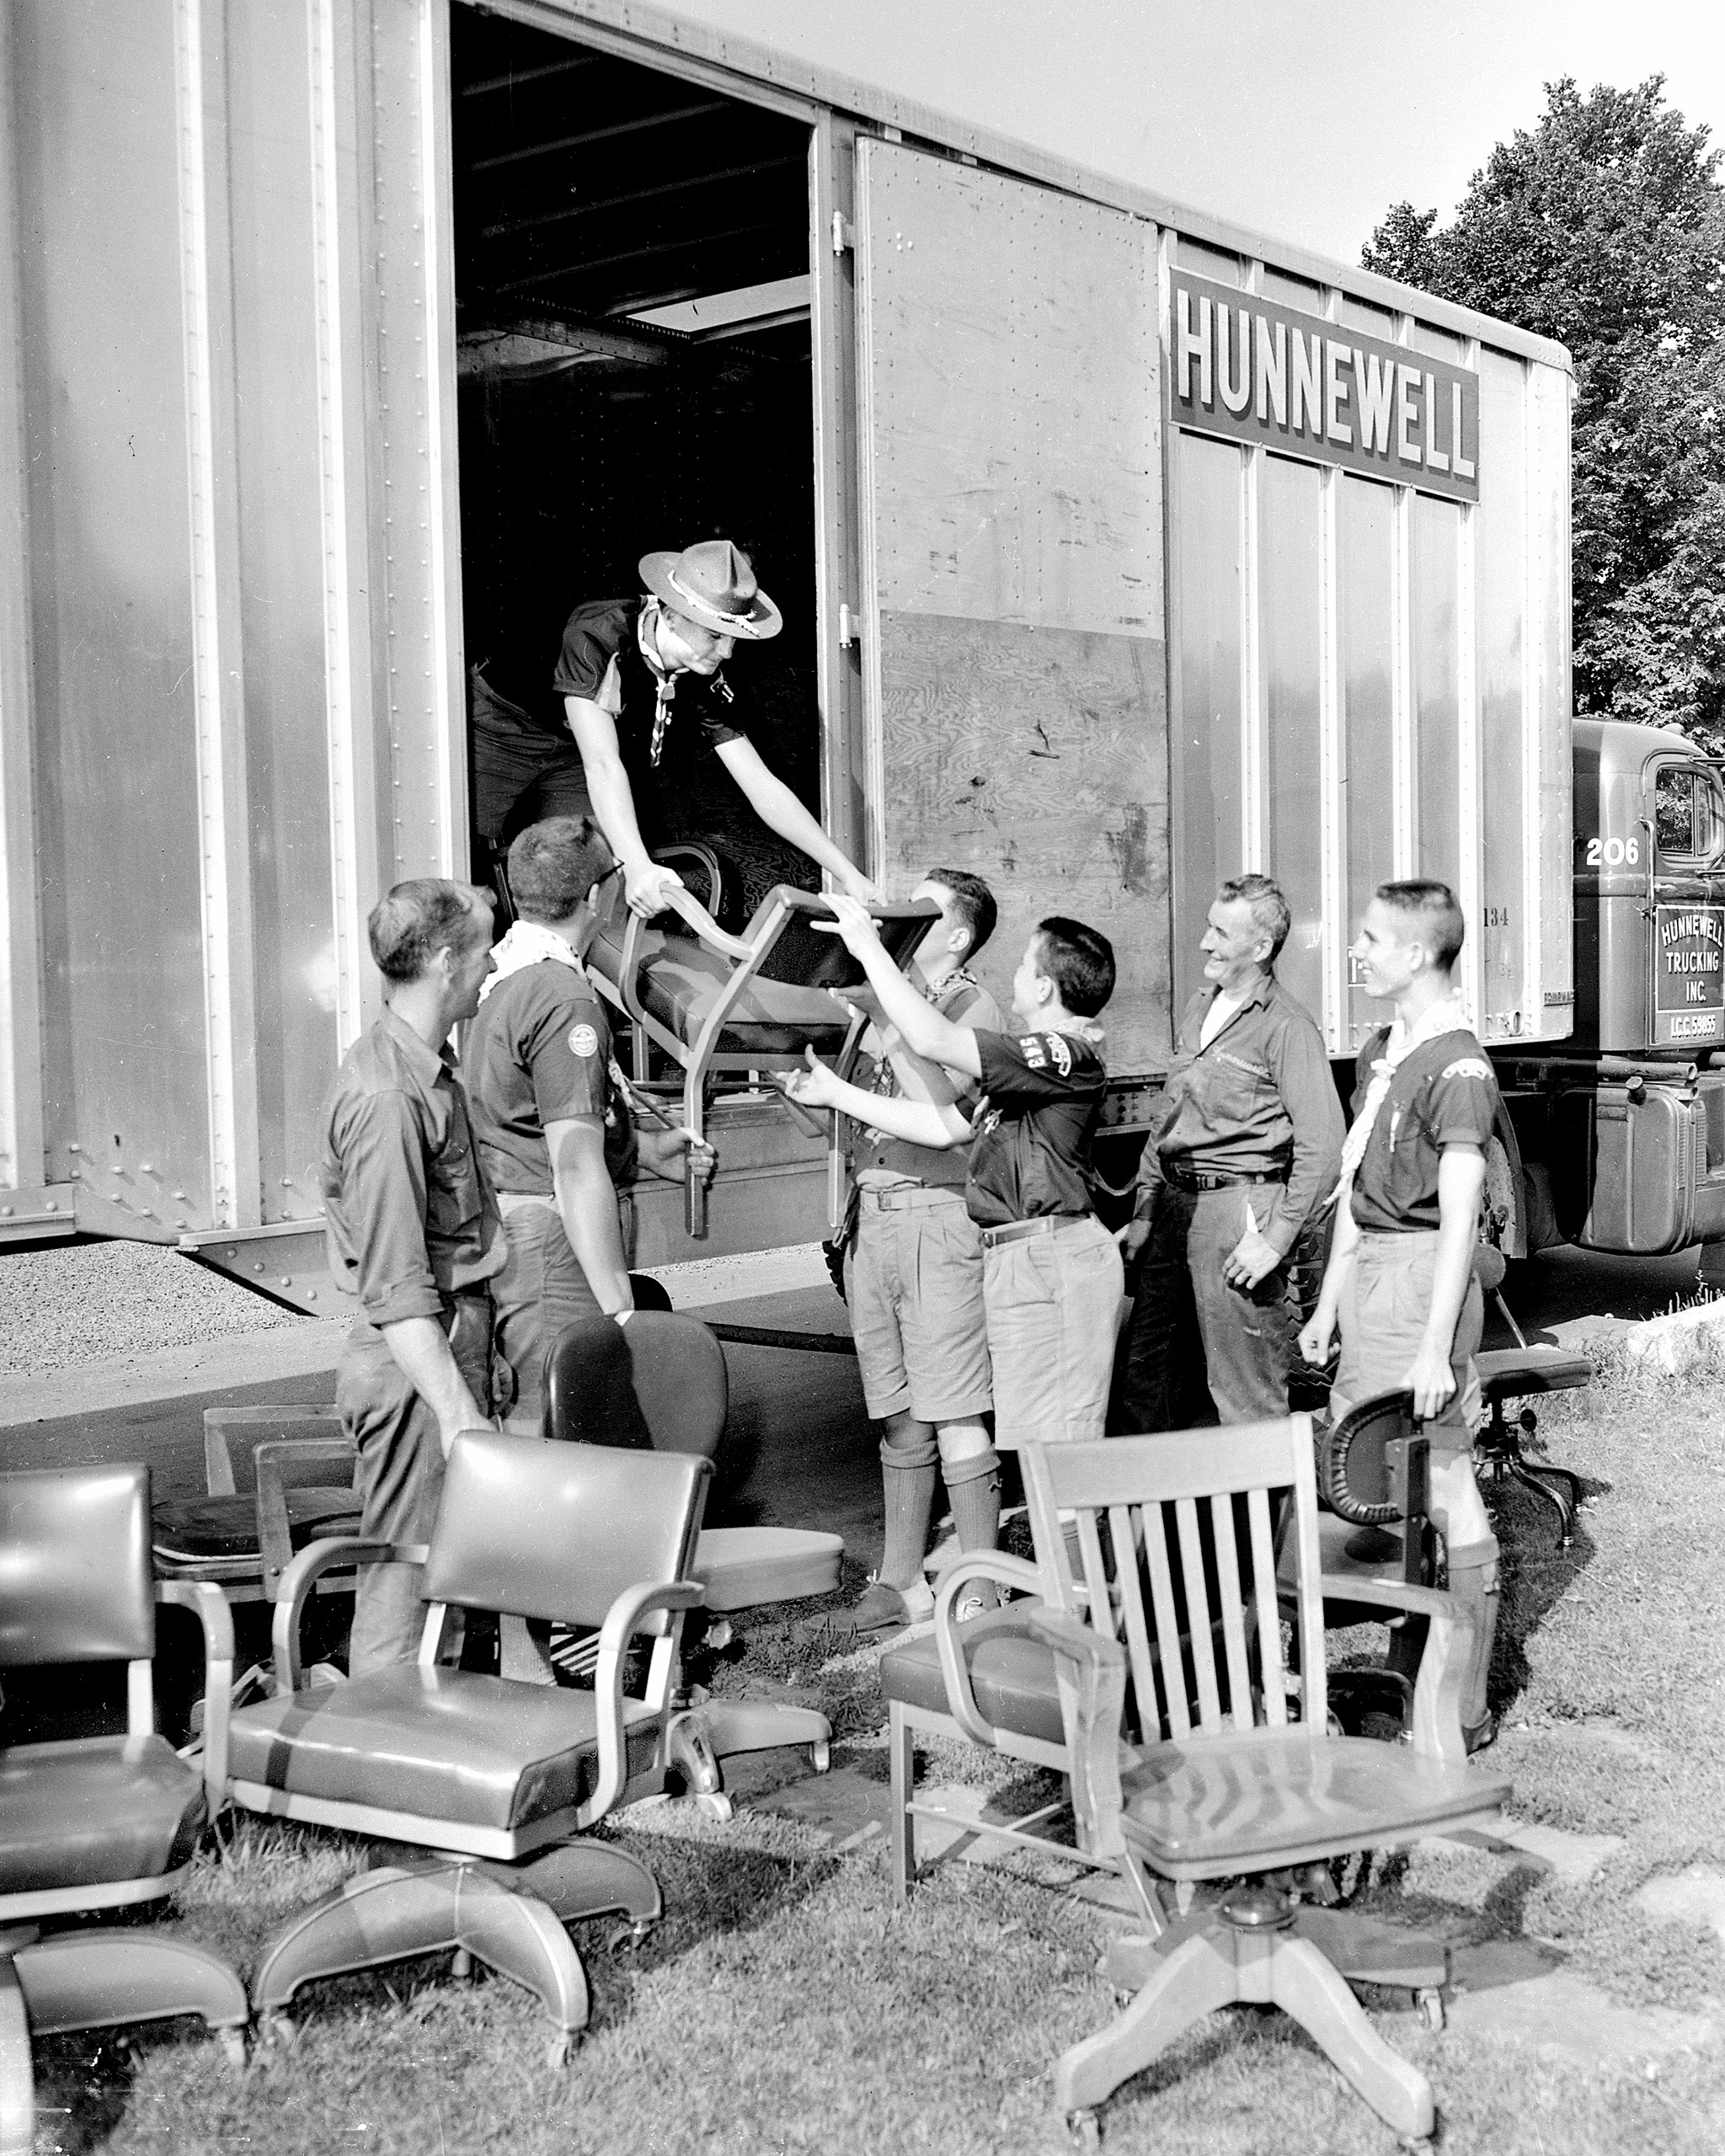 The Pine Tree Council, Boy Scouts of America, moved from Baxter Boulevard to new quarters on Auburn Street with Hunnewell Trucking helping out. Materials were loaded and unloaded by scouts and Hunnewell drivers. 1959.